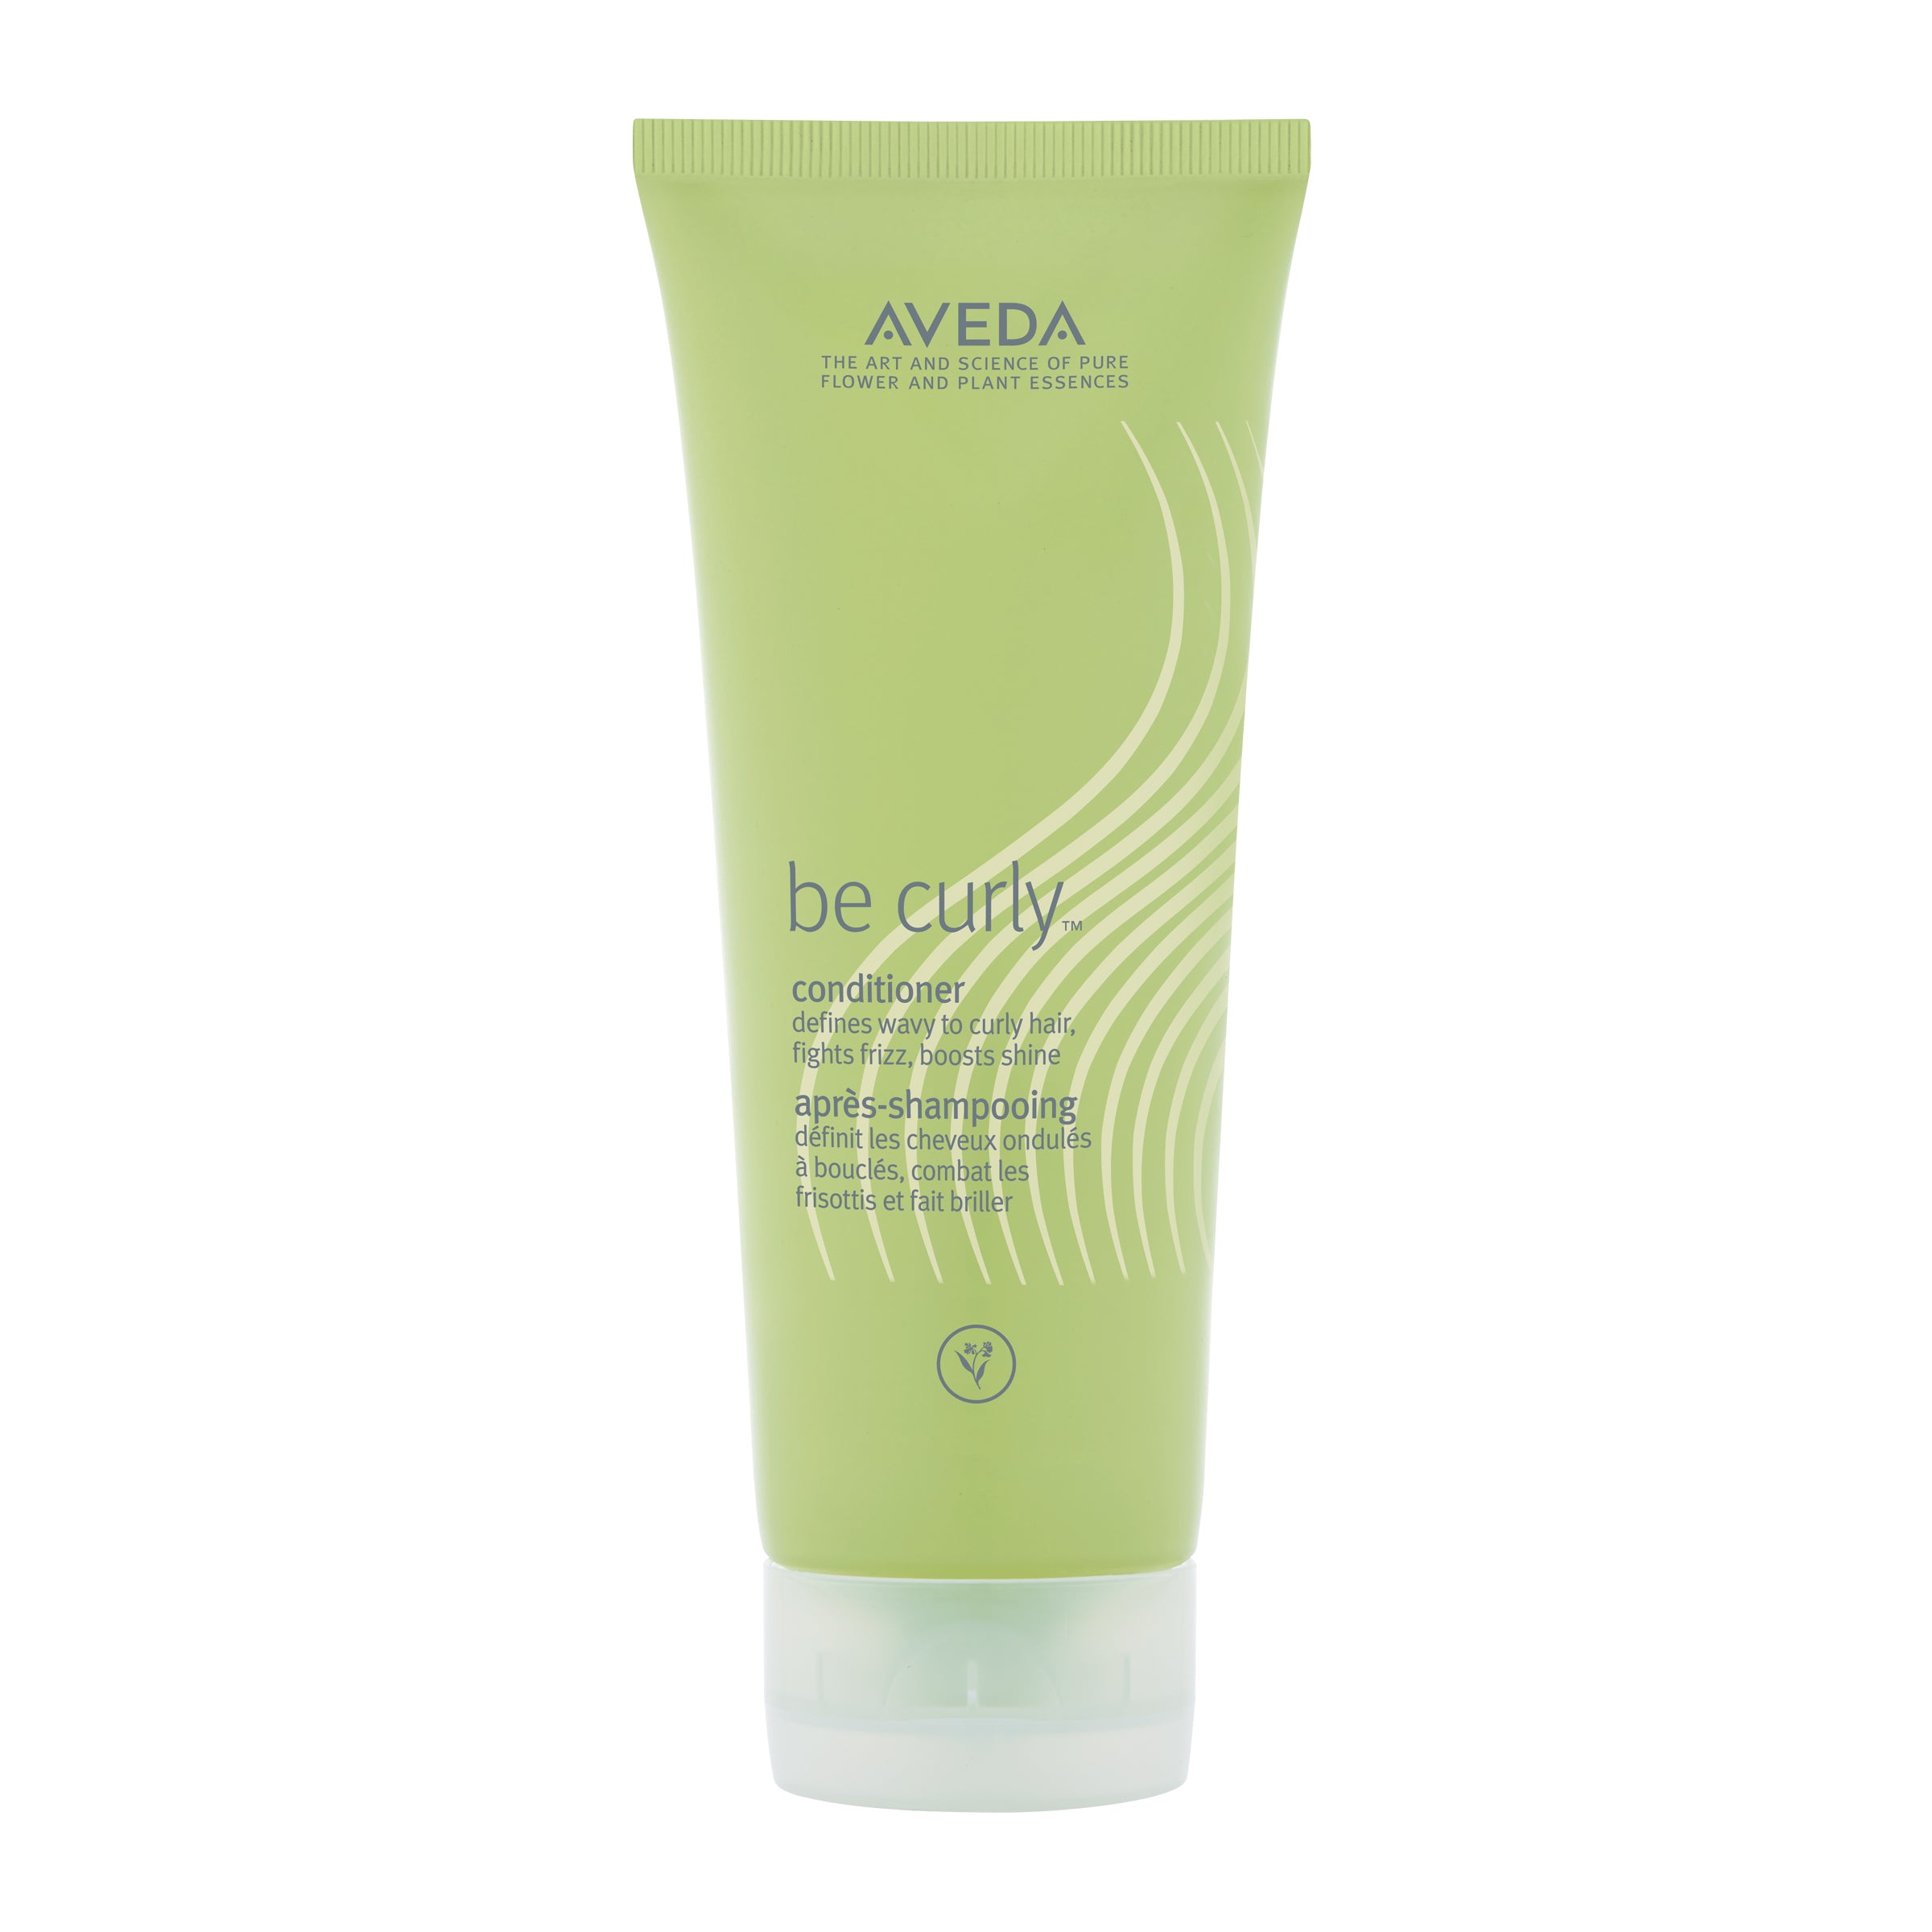 Aveda aveda be curly™ conditioner - 200ml